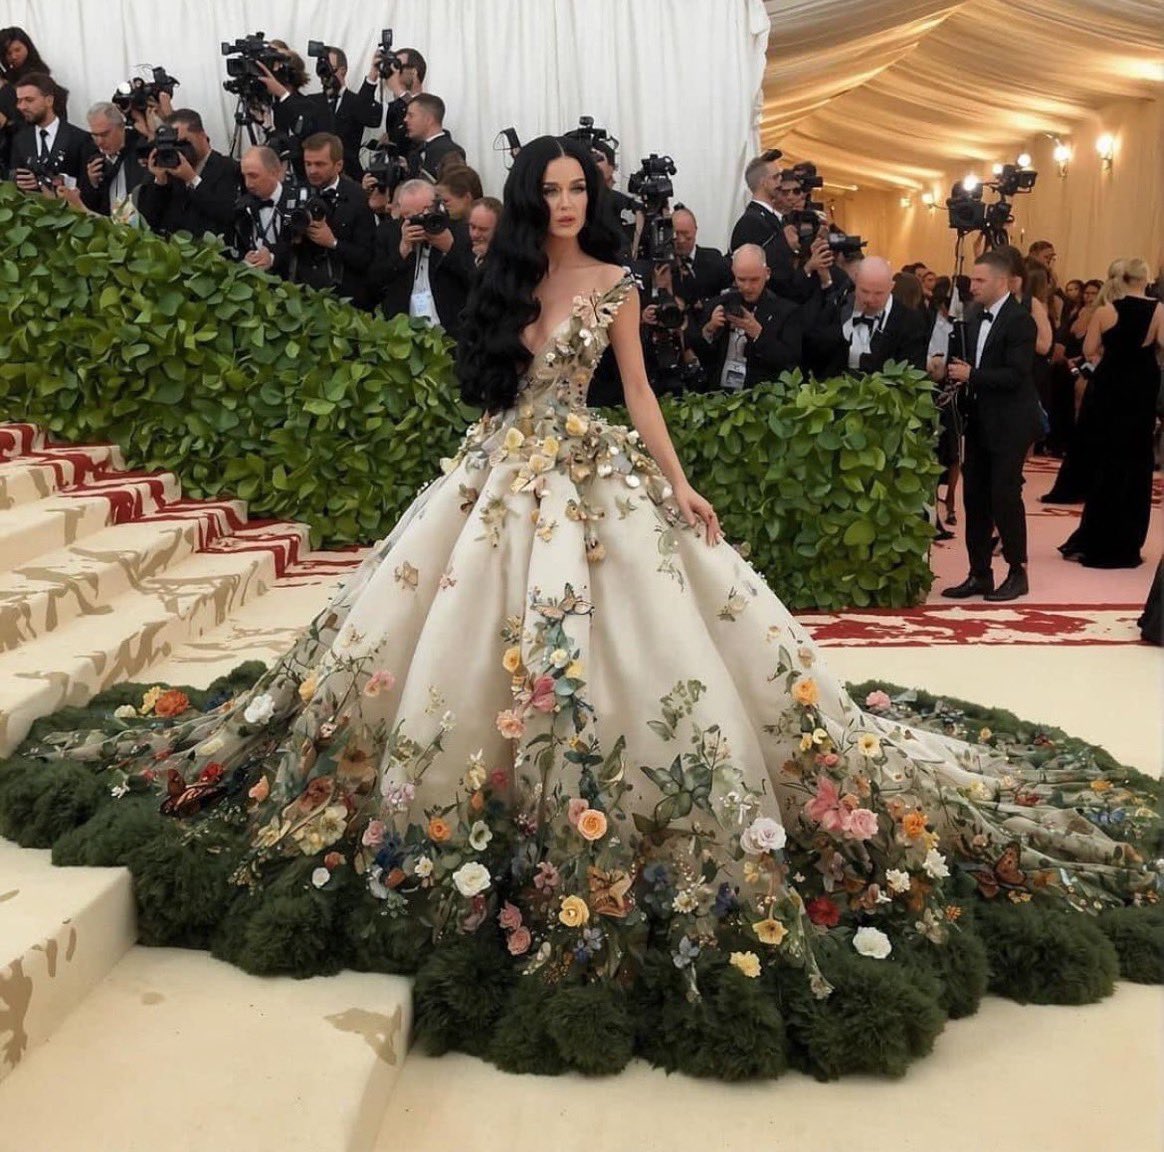 This ALMOST makes up for years of no hits, and i’m so serious #MetGala